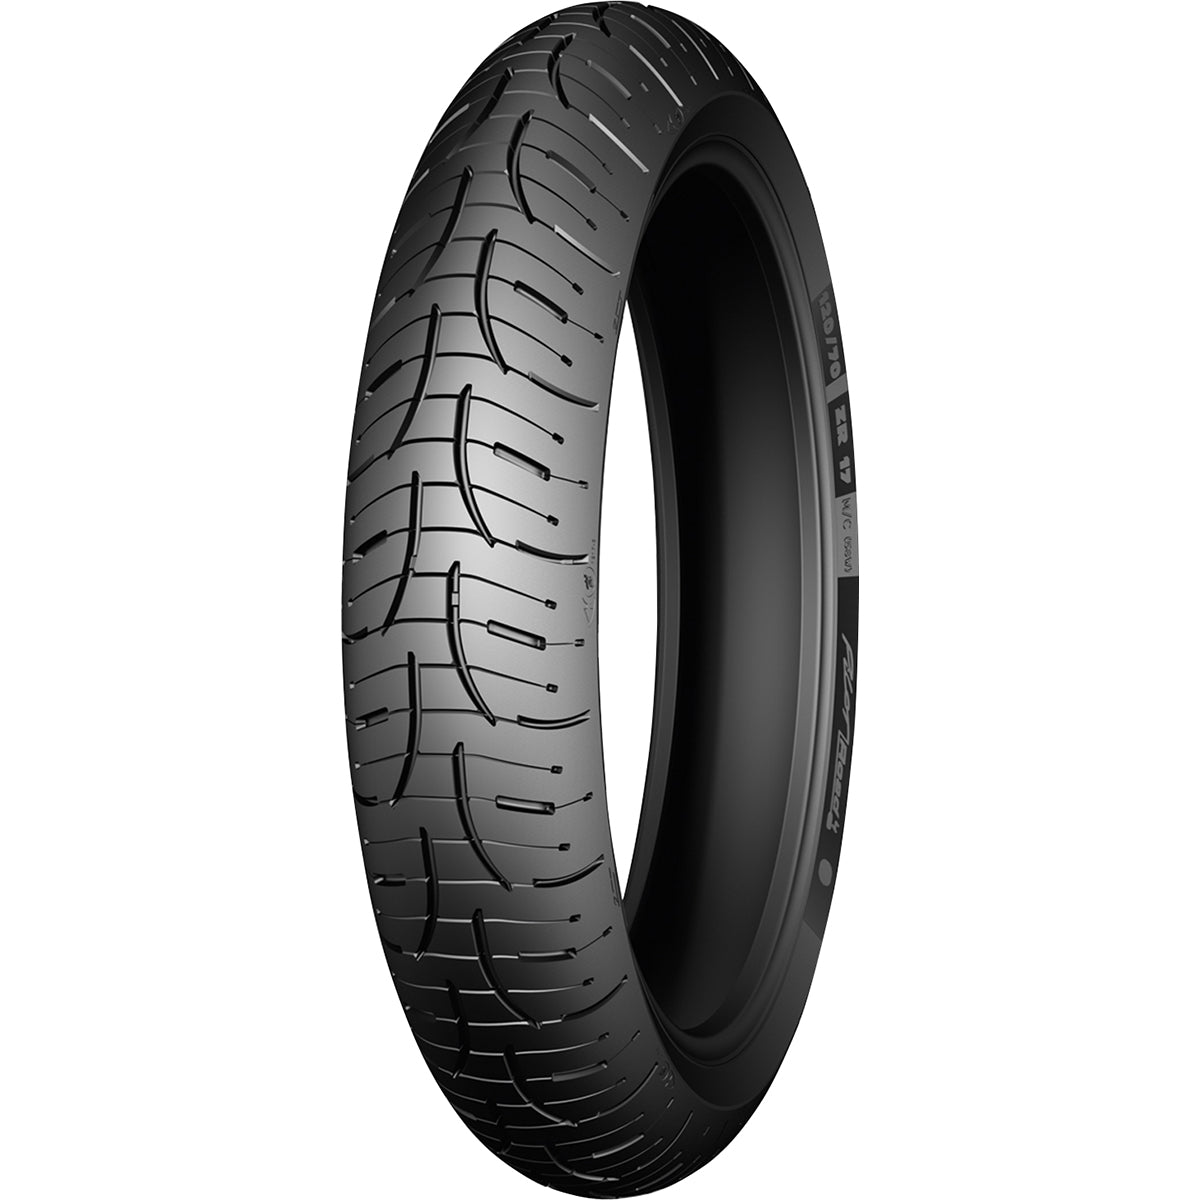 Michelin Pilot Road 4 17" Front Street Tires-0301